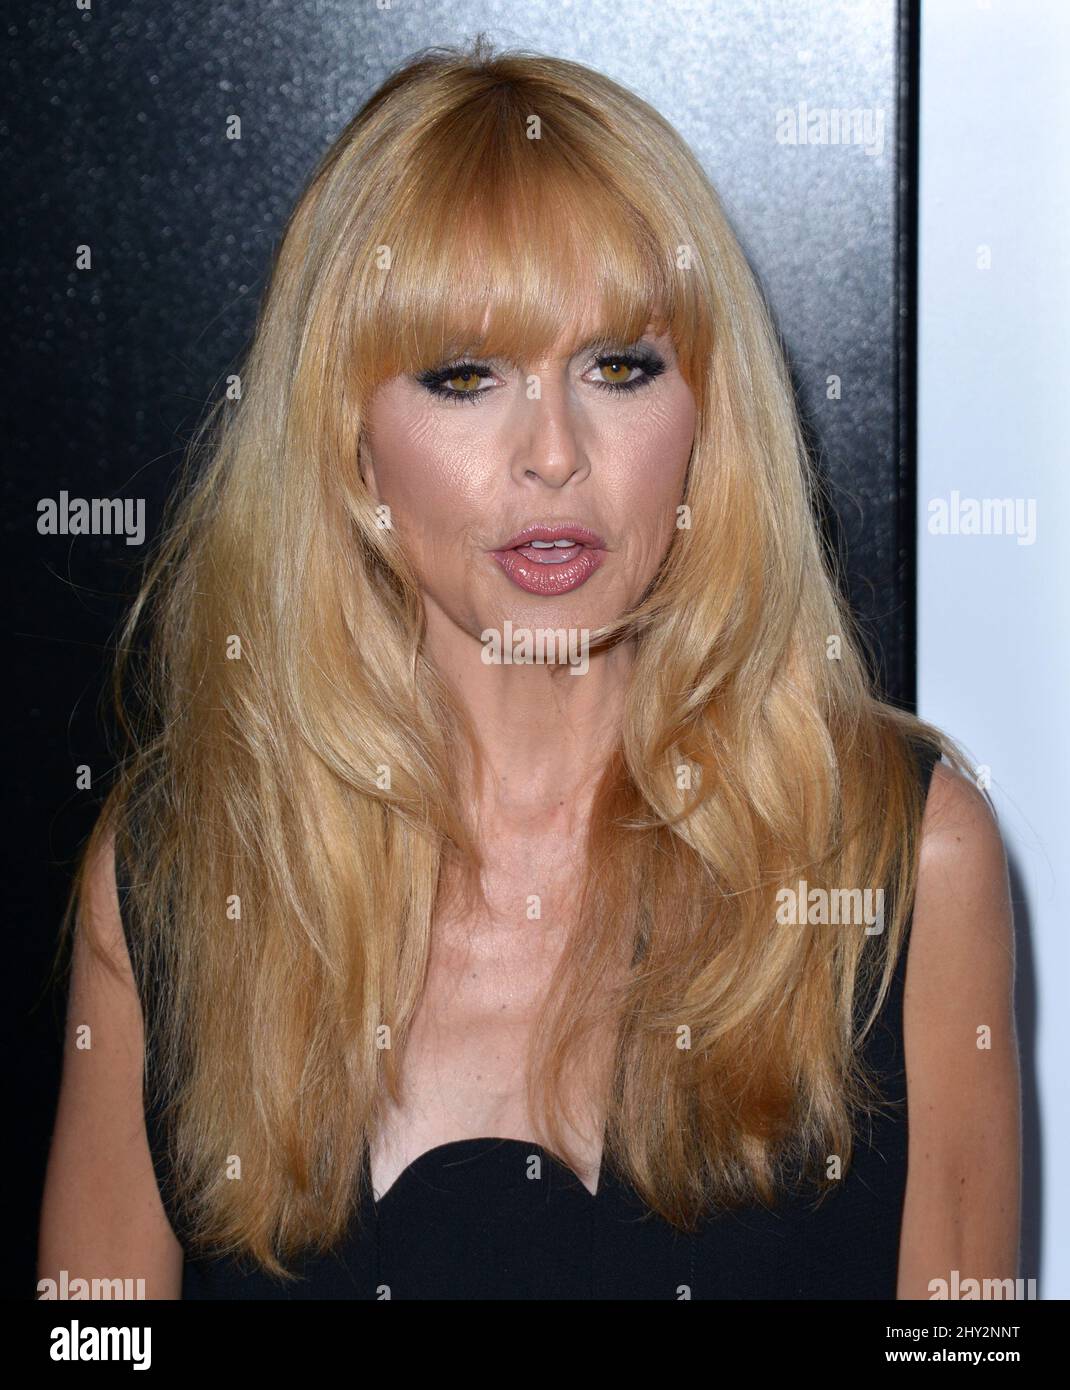 Rachel Zoe frequenta il Who What Wear party The London Hotel Foto Stock